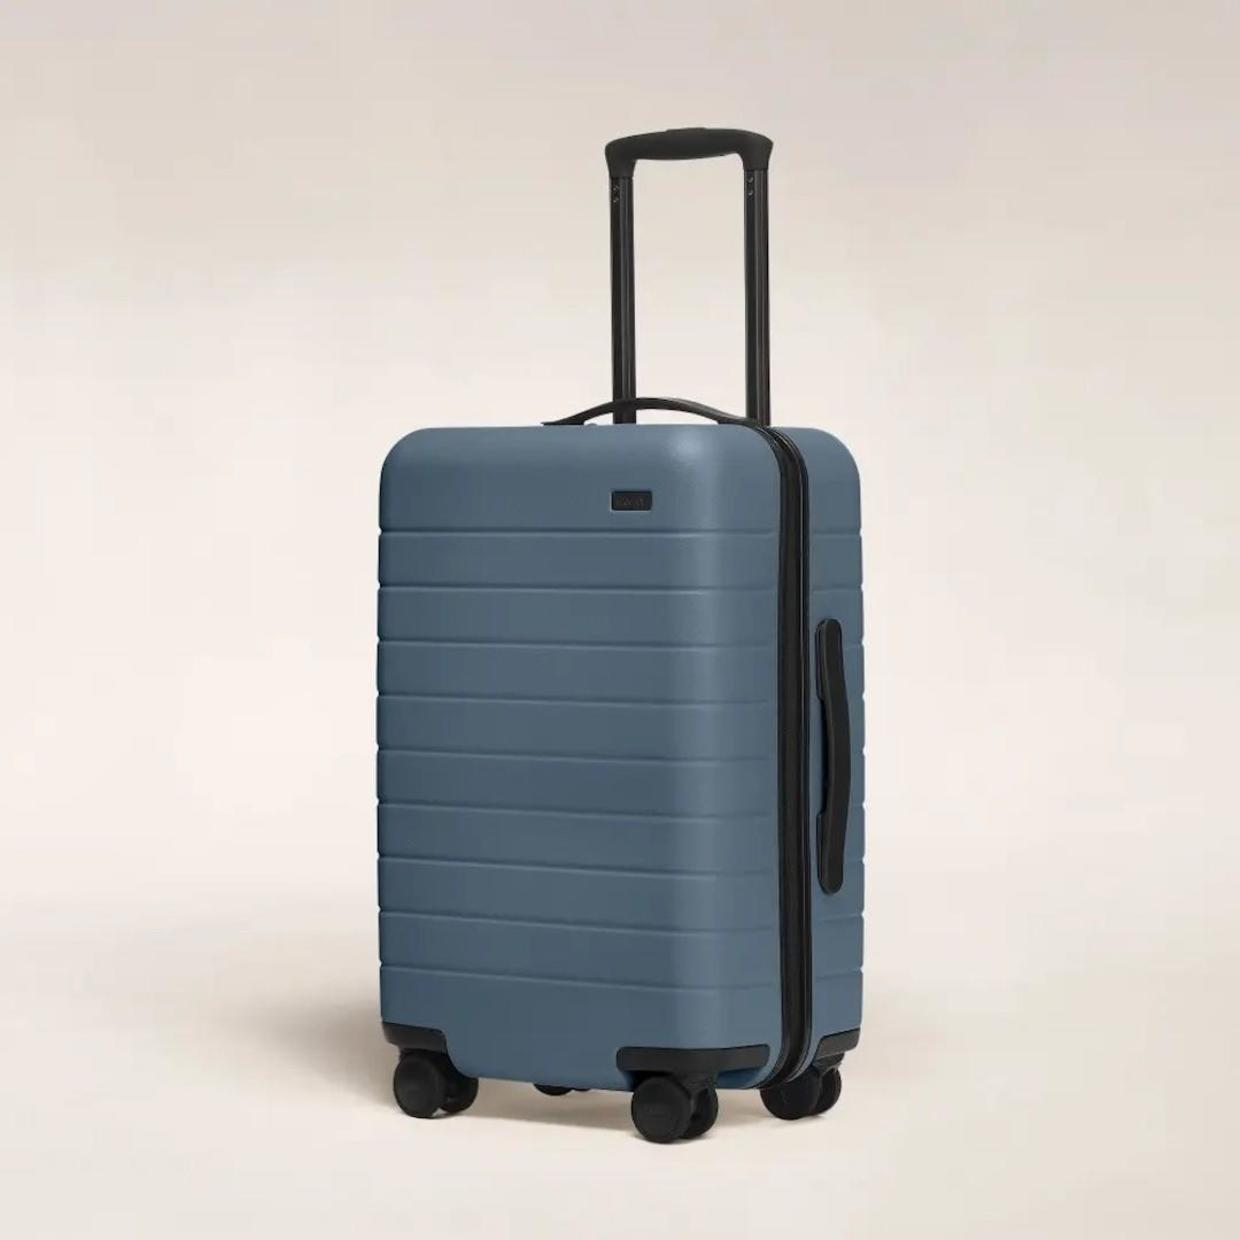 The best rolling luggage in 2022 - CBS News